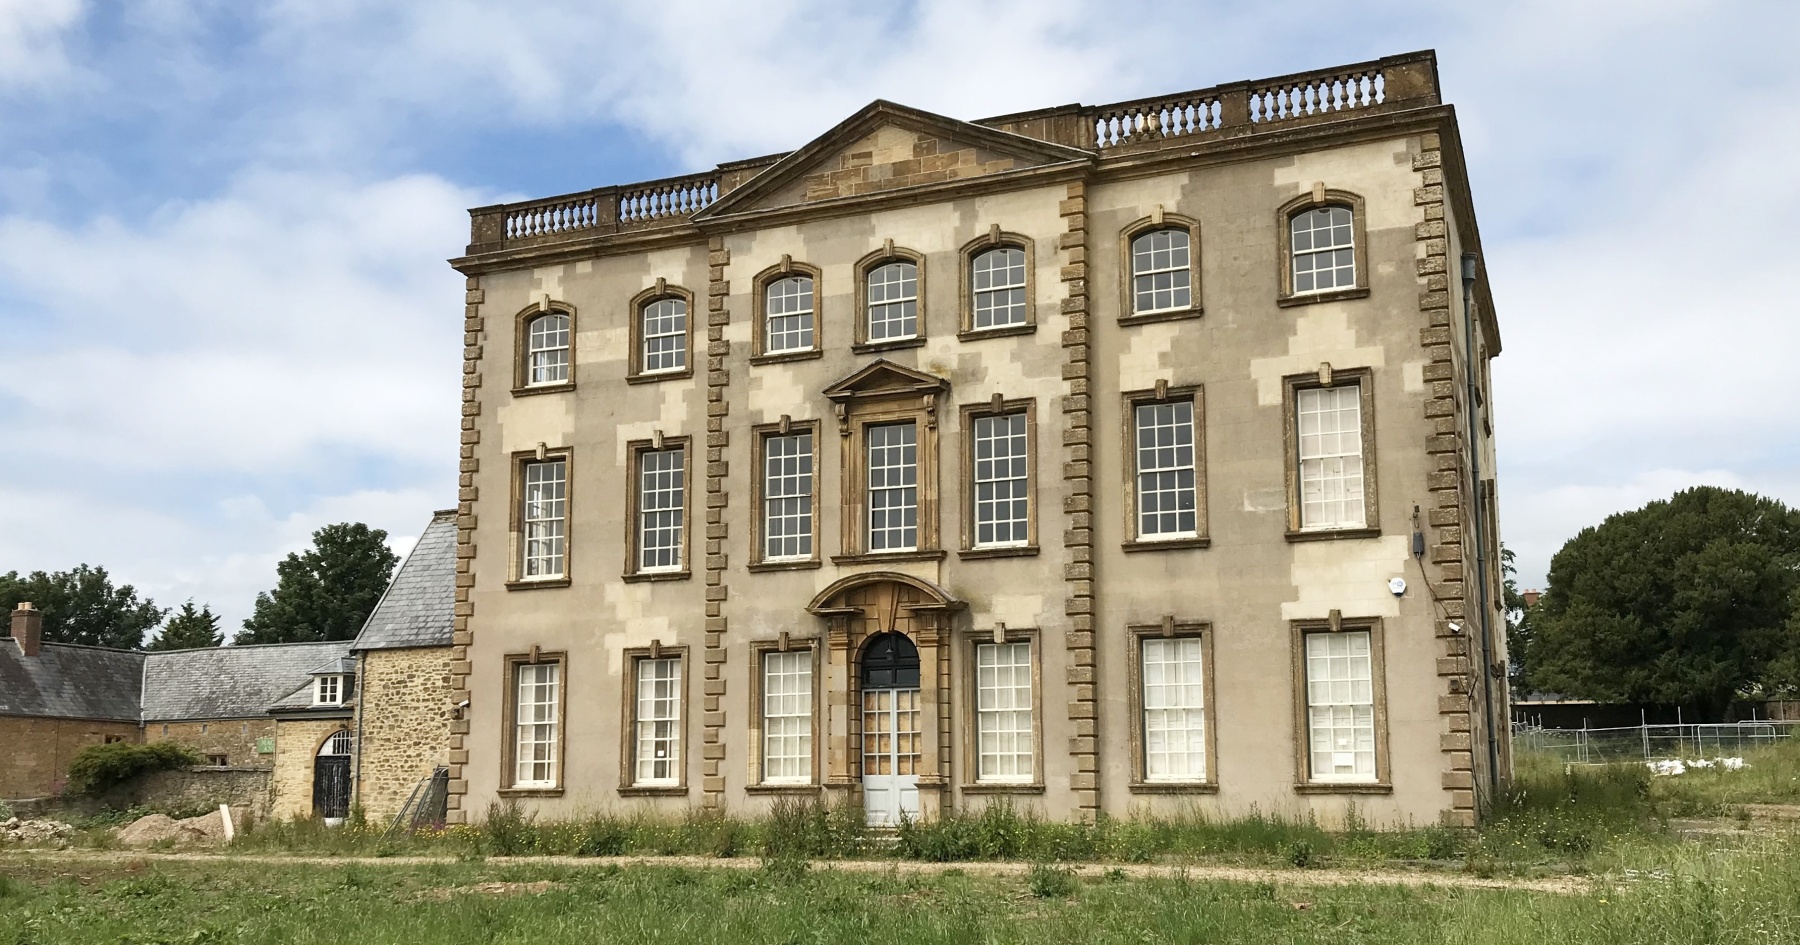 Sherborne House Dorset Mann Williams Conservation Structural Engineers